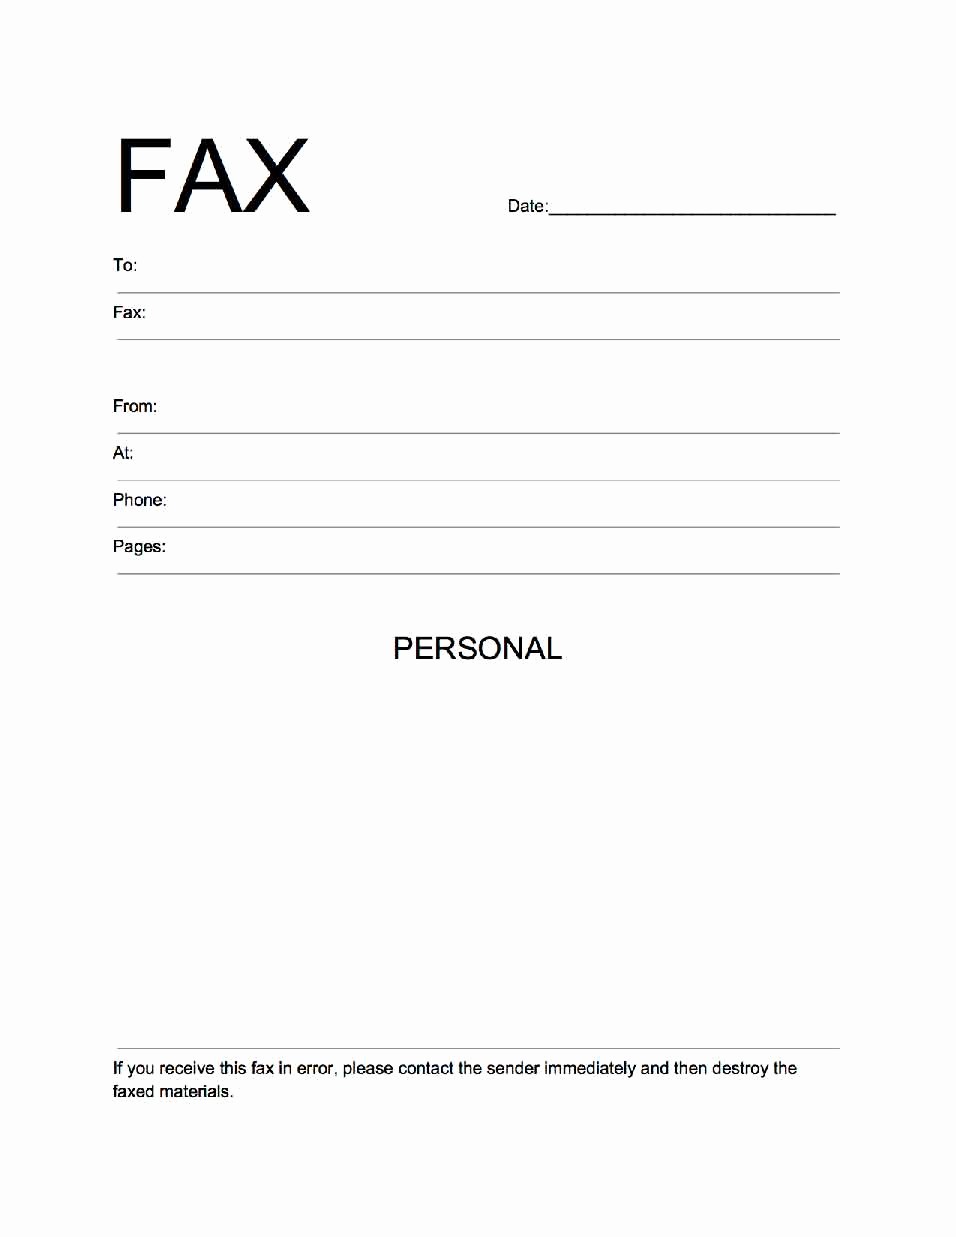 Free Fax Cover Sheets Download Awesome Free Fax Cover Sheet Template Download